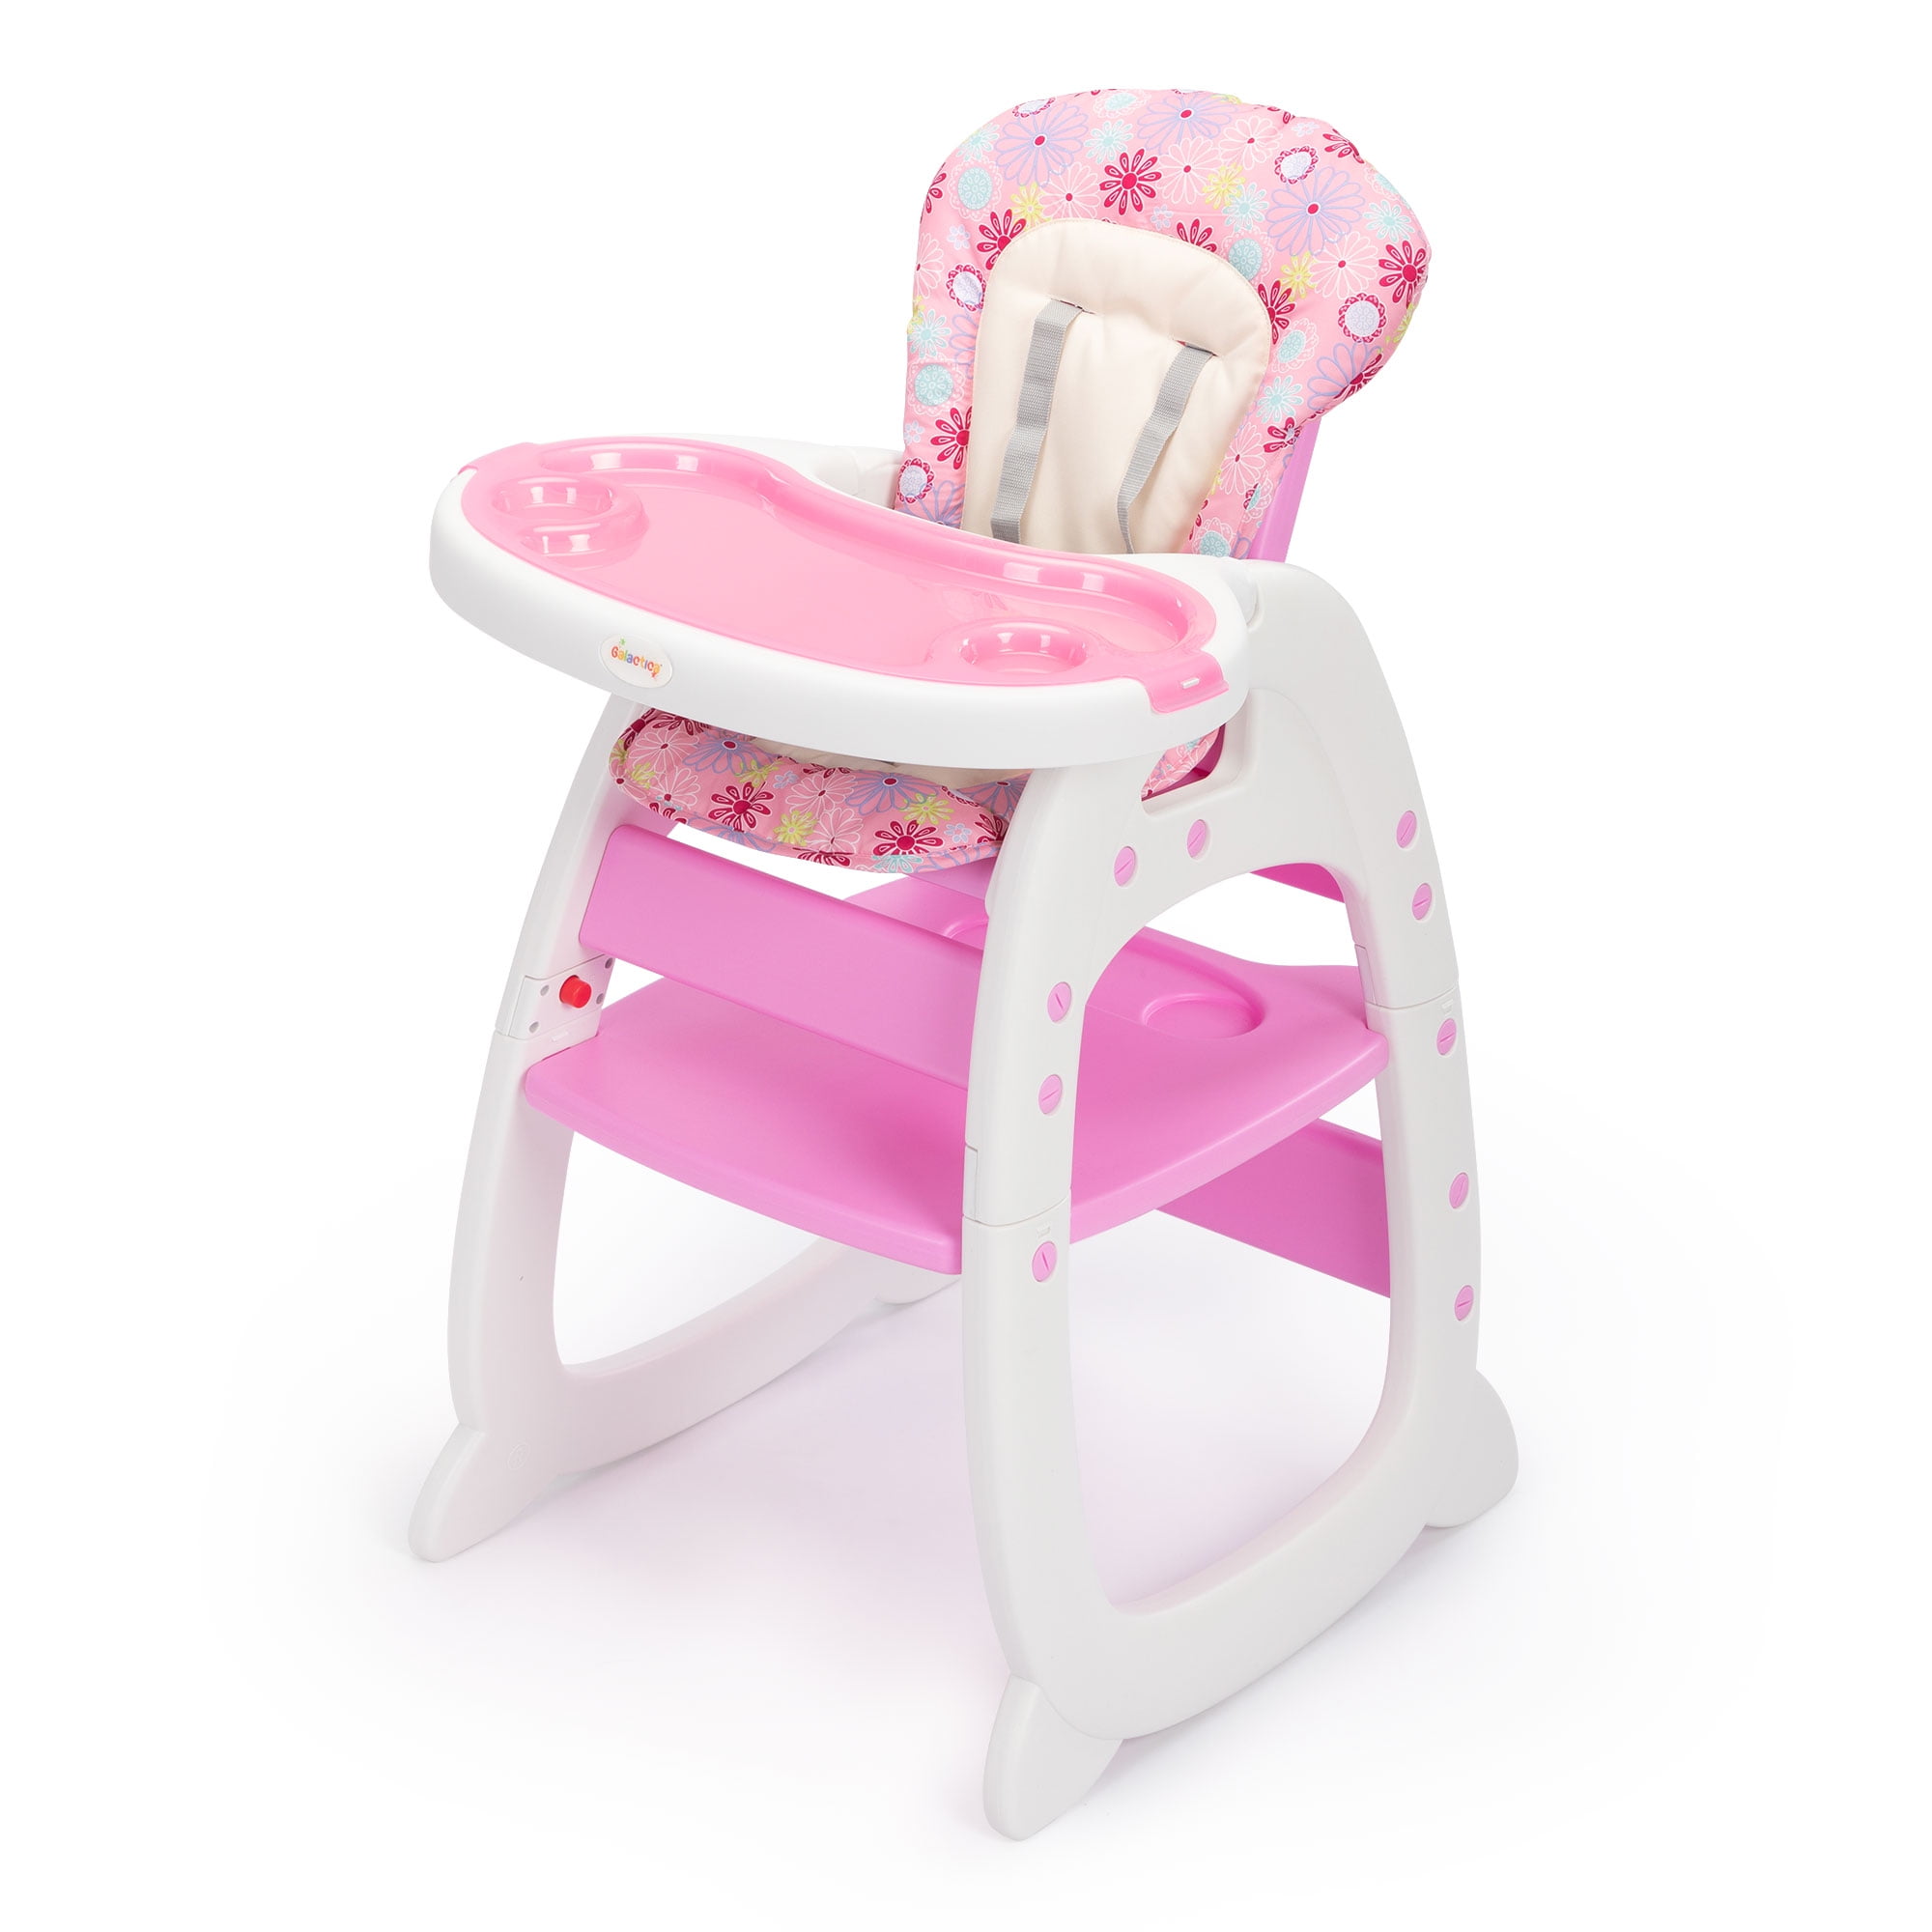 Swekid 3-in-1 Portable High Chair for Babies & Toddlers, Baby Hook